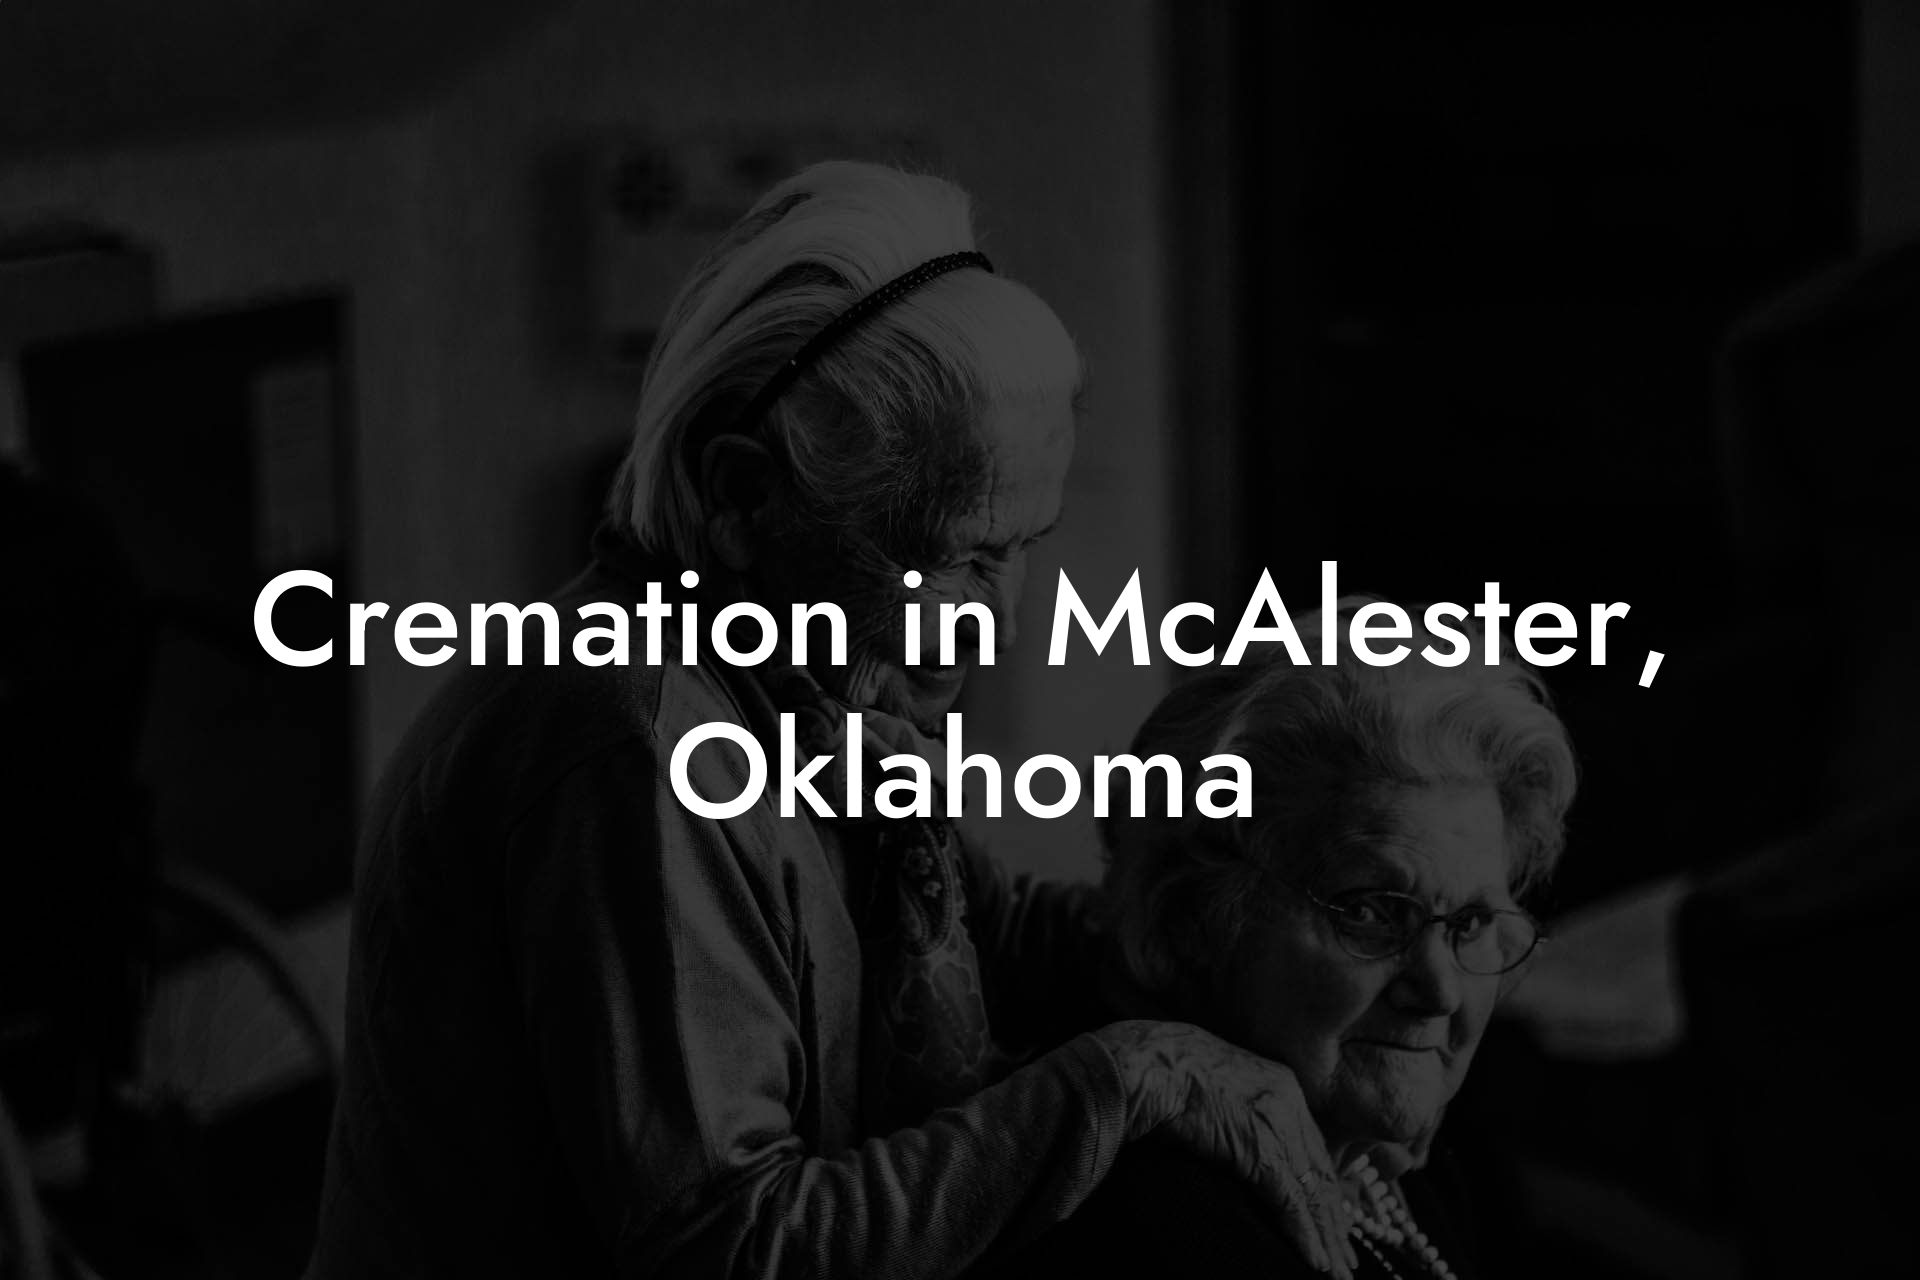 Cremation in McAlester, Oklahoma